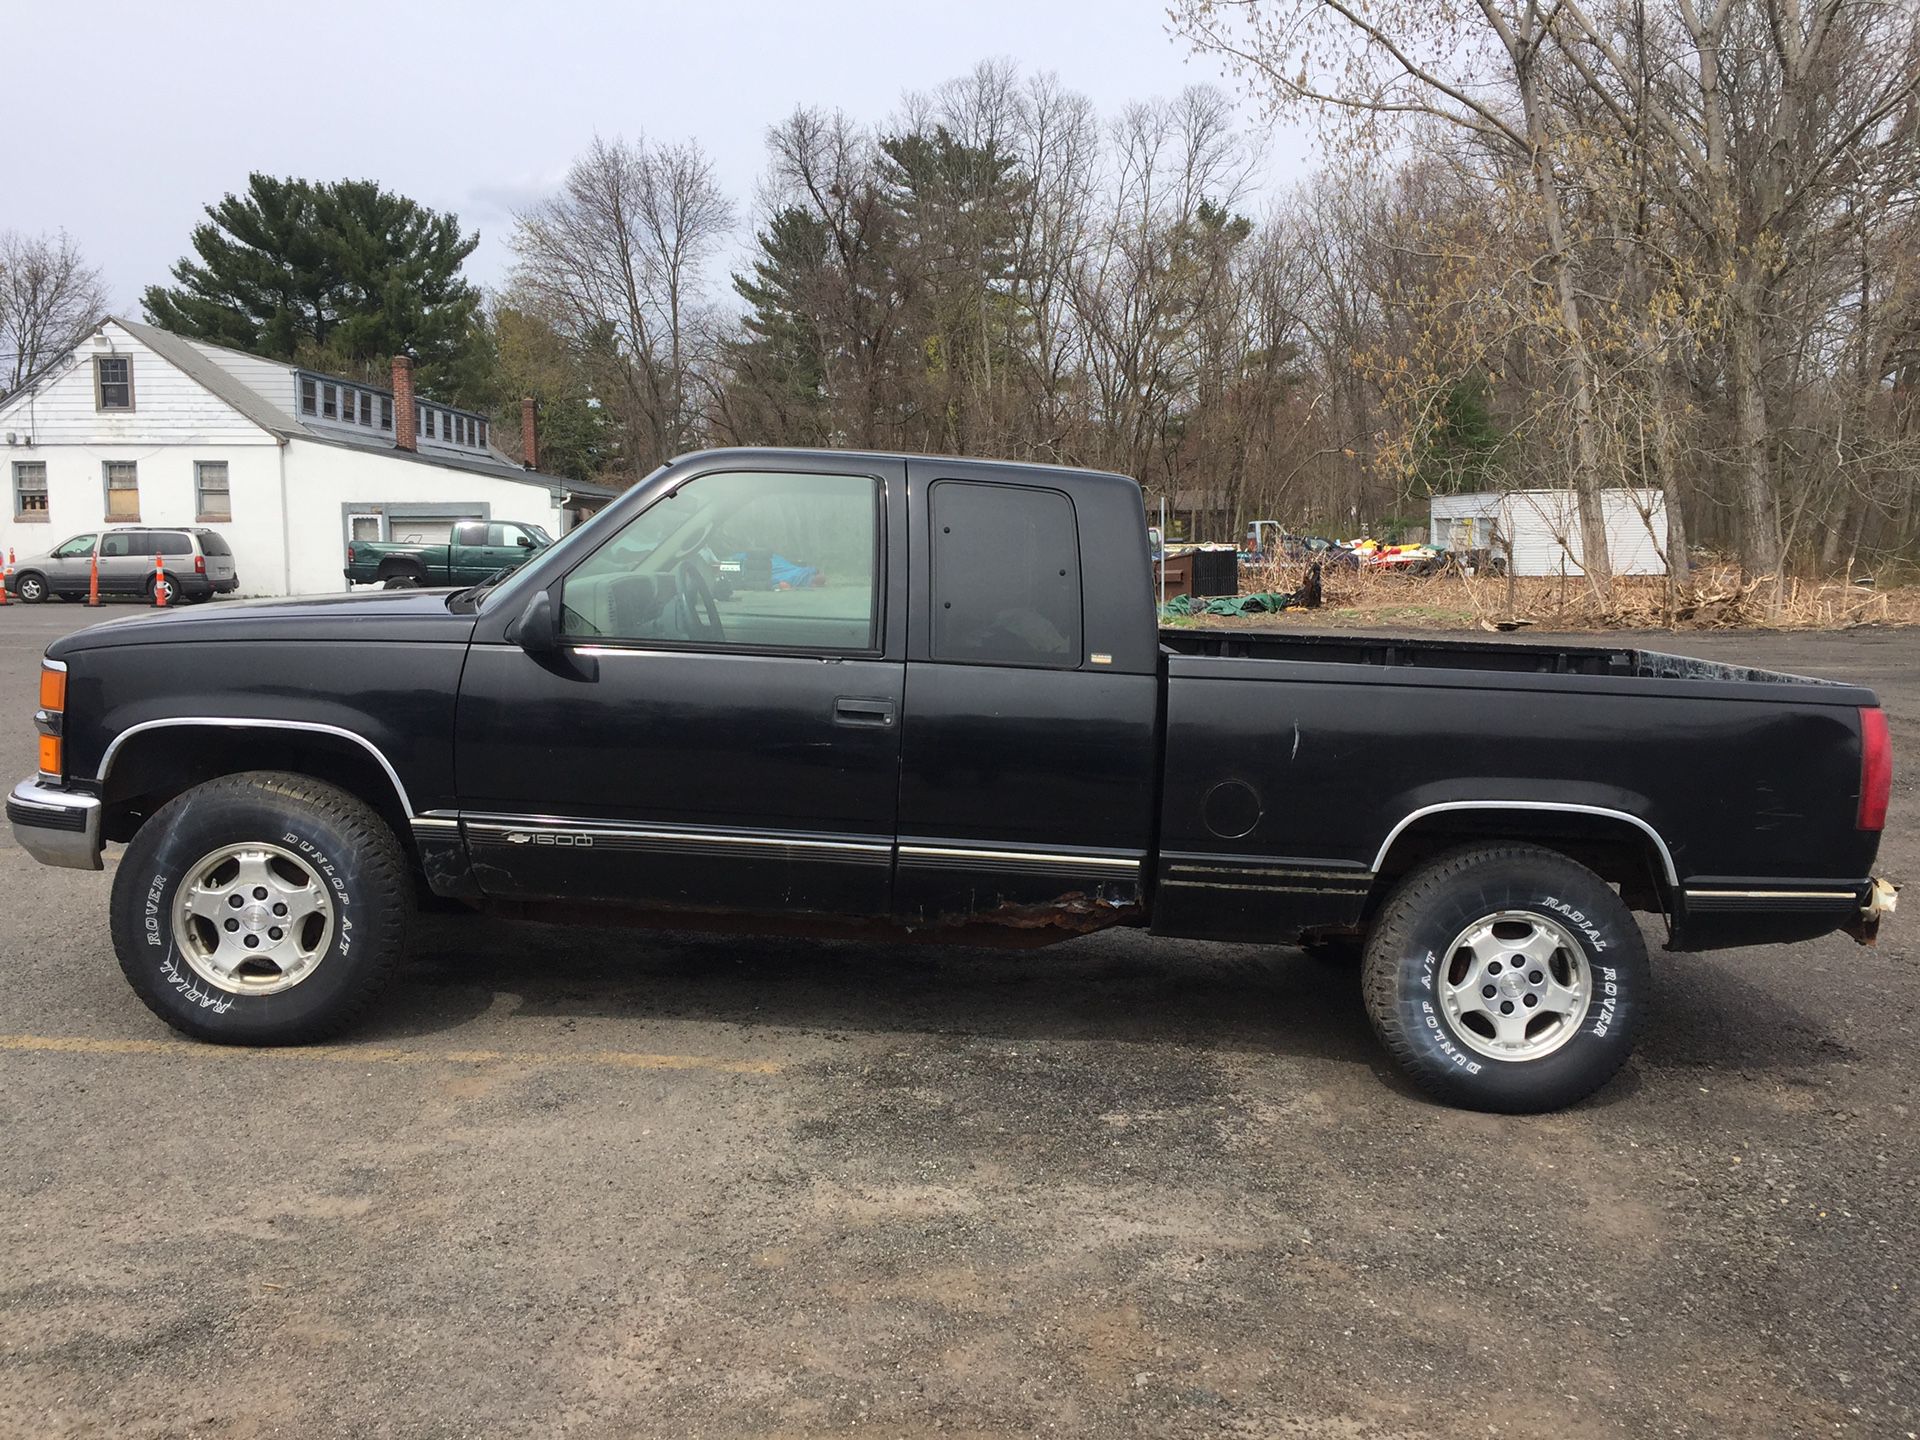 Parts only. 1997 Chevy K1500 extended cab 5.7 auto,4wd